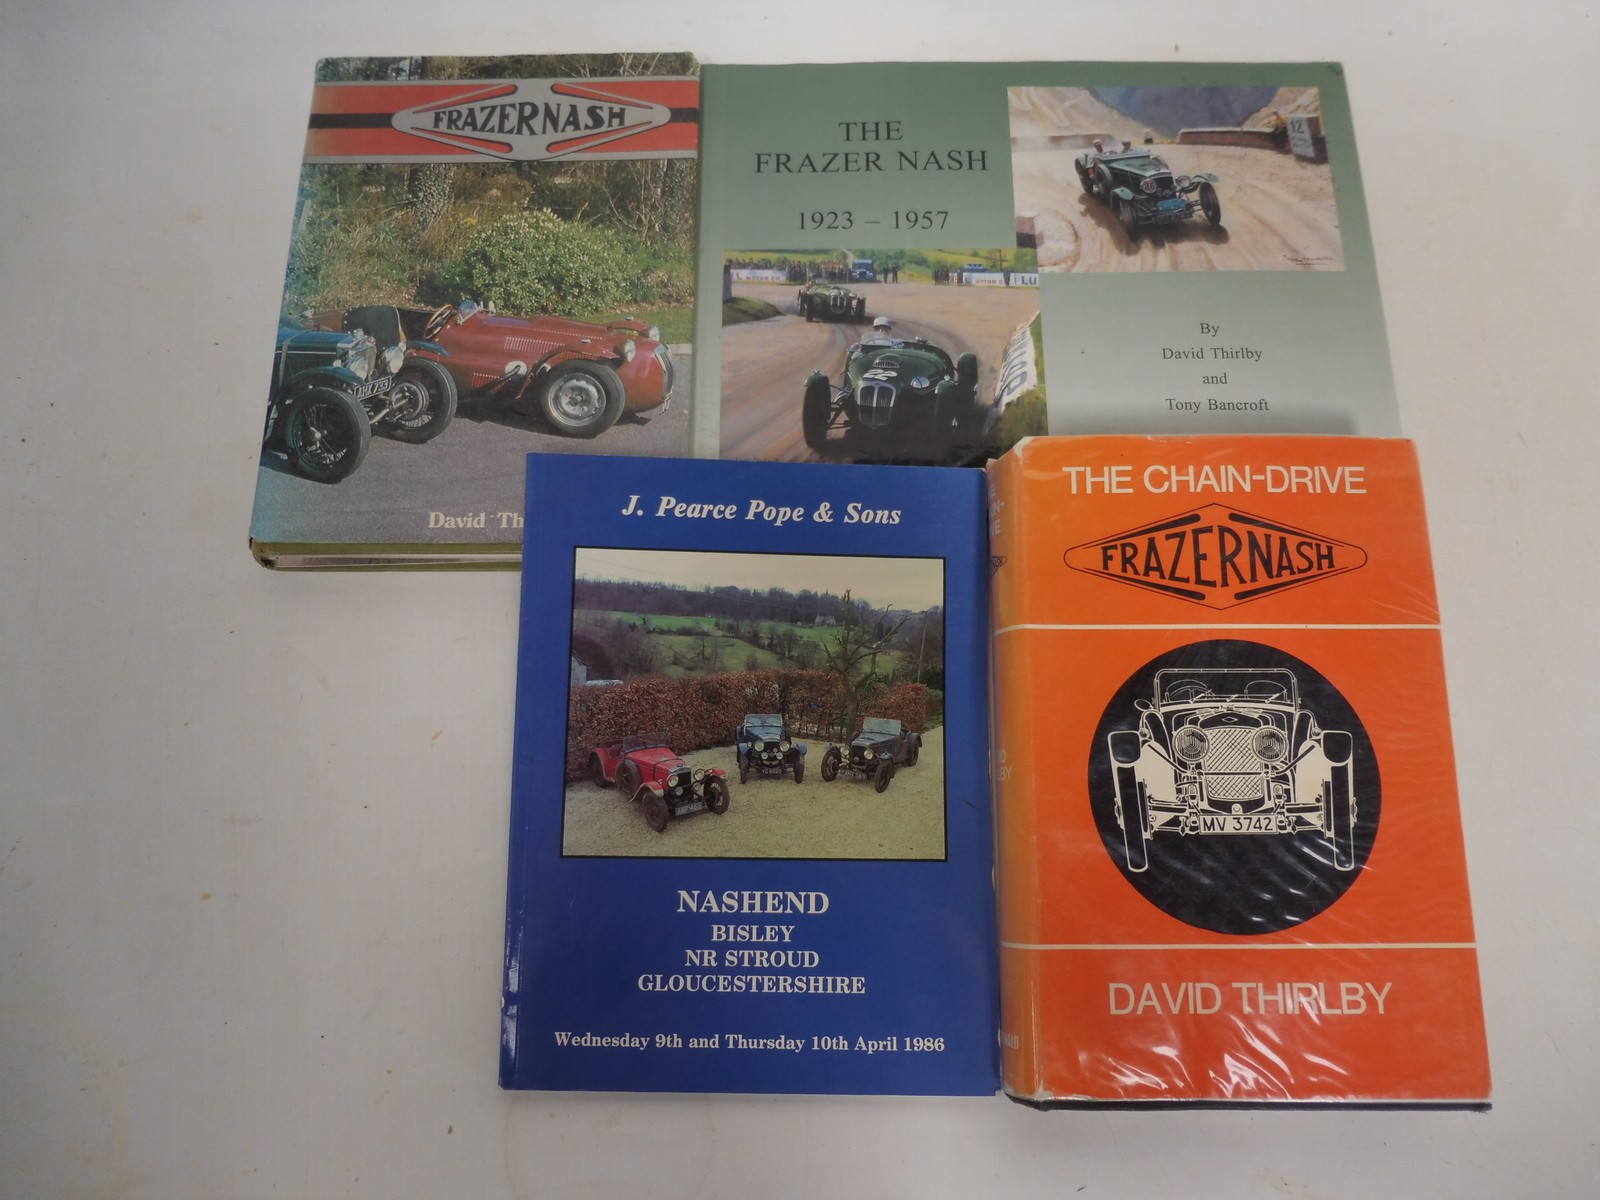 Four volumes relating to Frazer Nash including The Frazer Nash 1923-1957 by Thirlby and Bancroft,